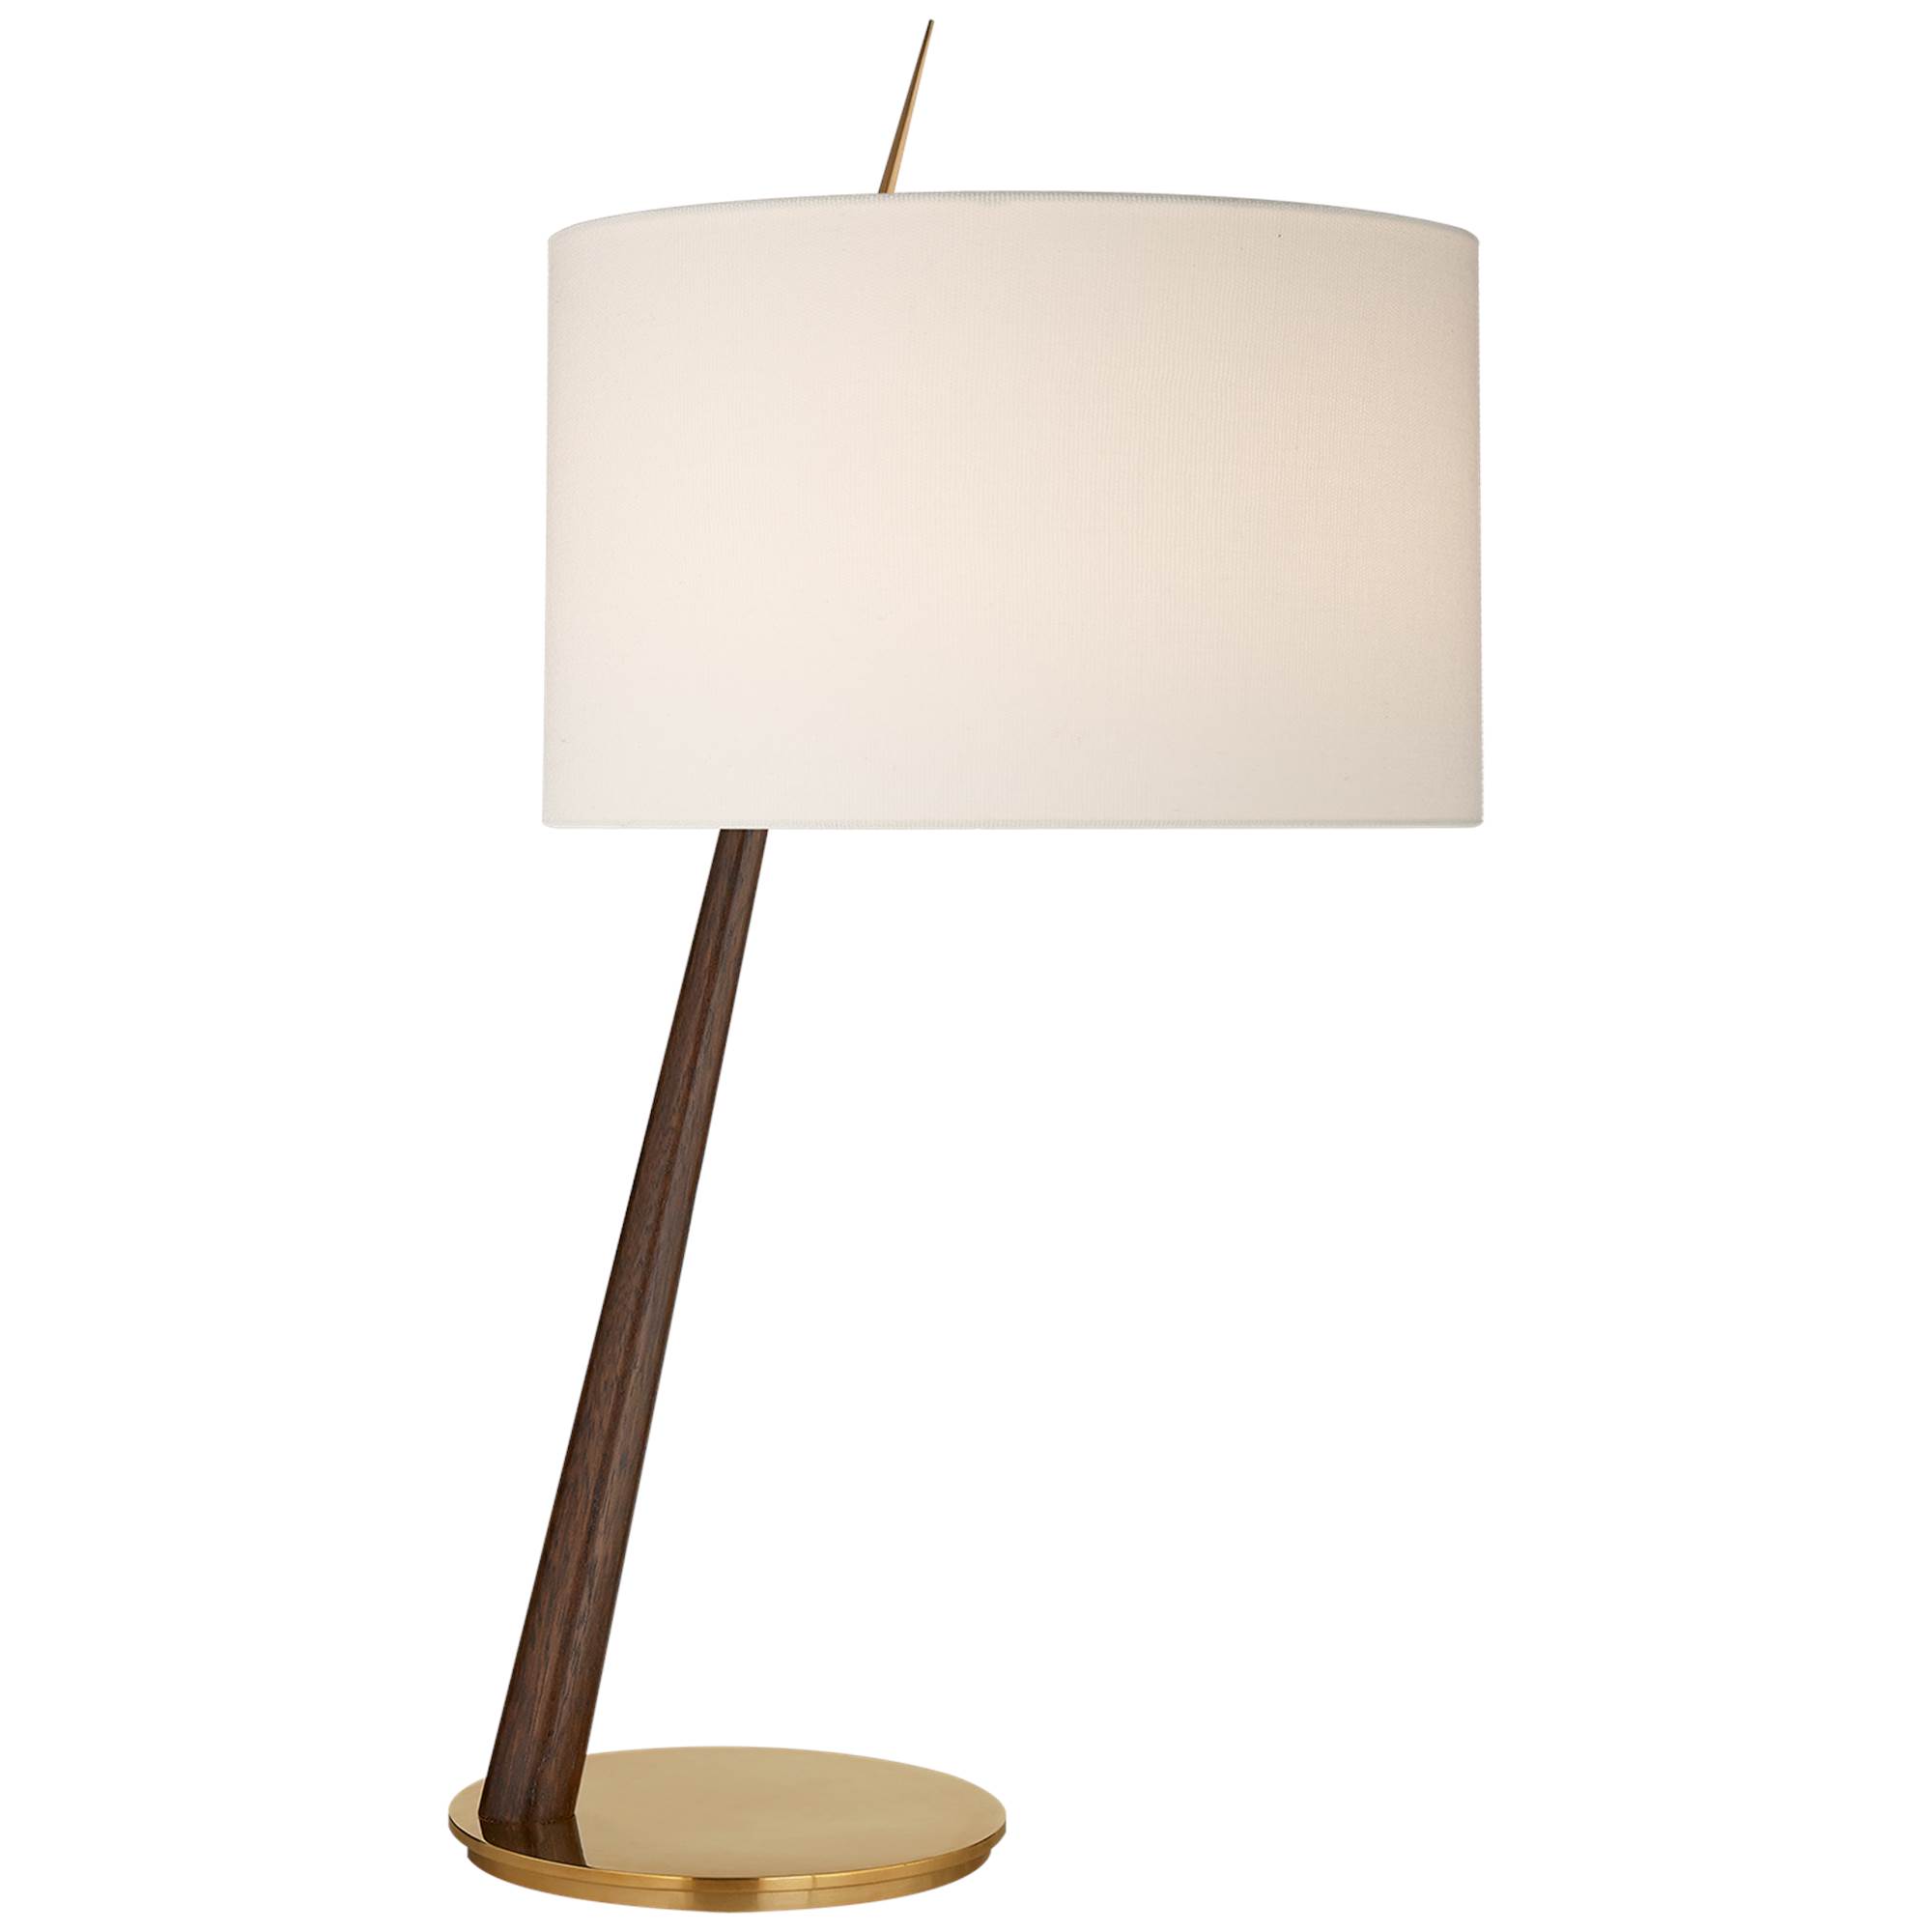 Visual Comfort Stylus Large Angled Table Lamp with Linen Shade - Soft Brass